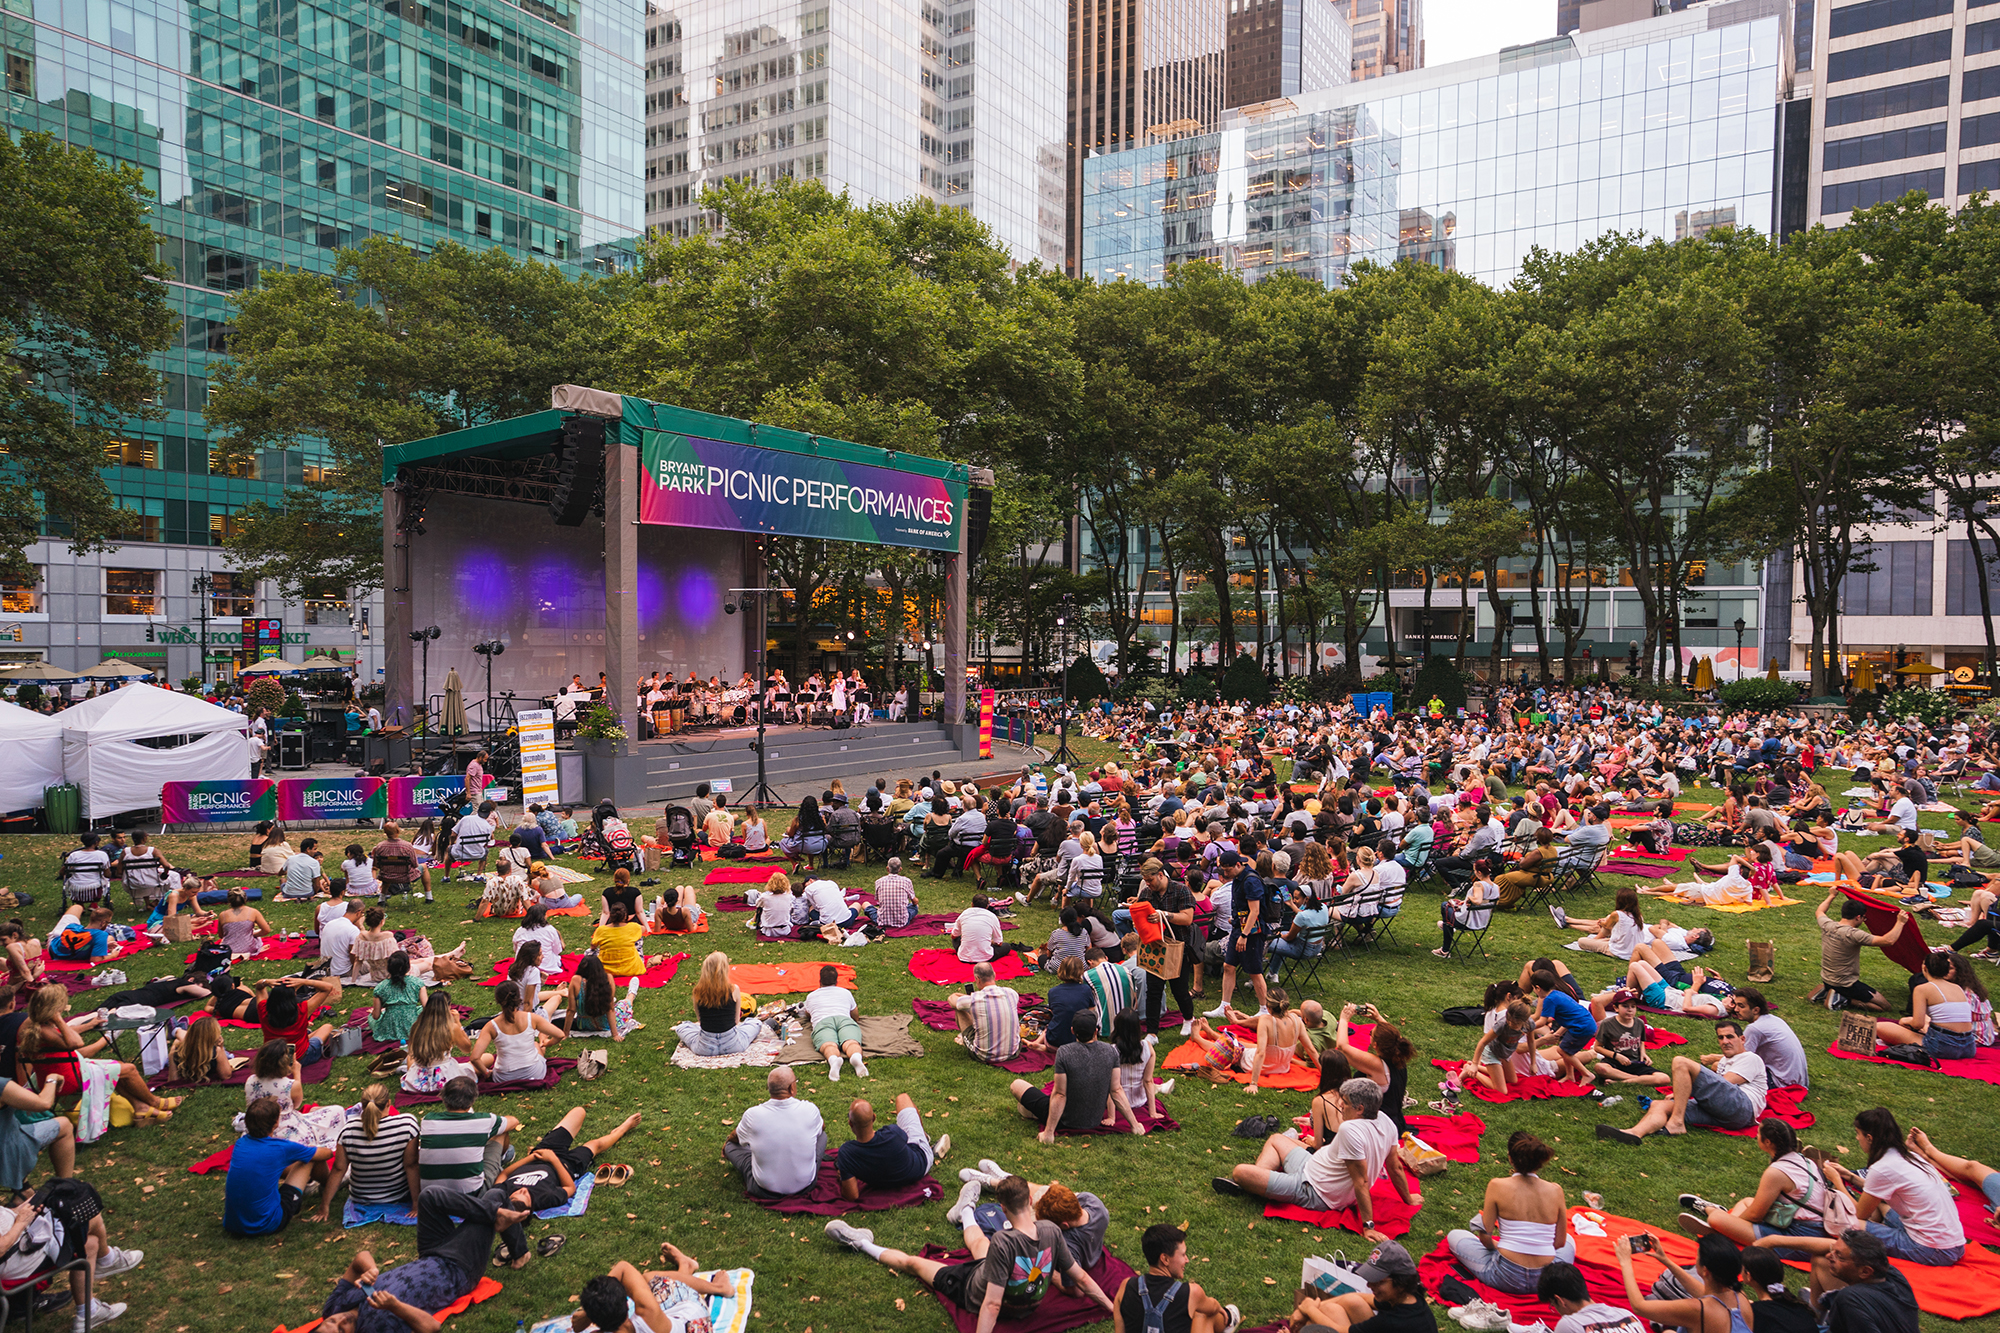 A group of people sit on a lawn for a concert.